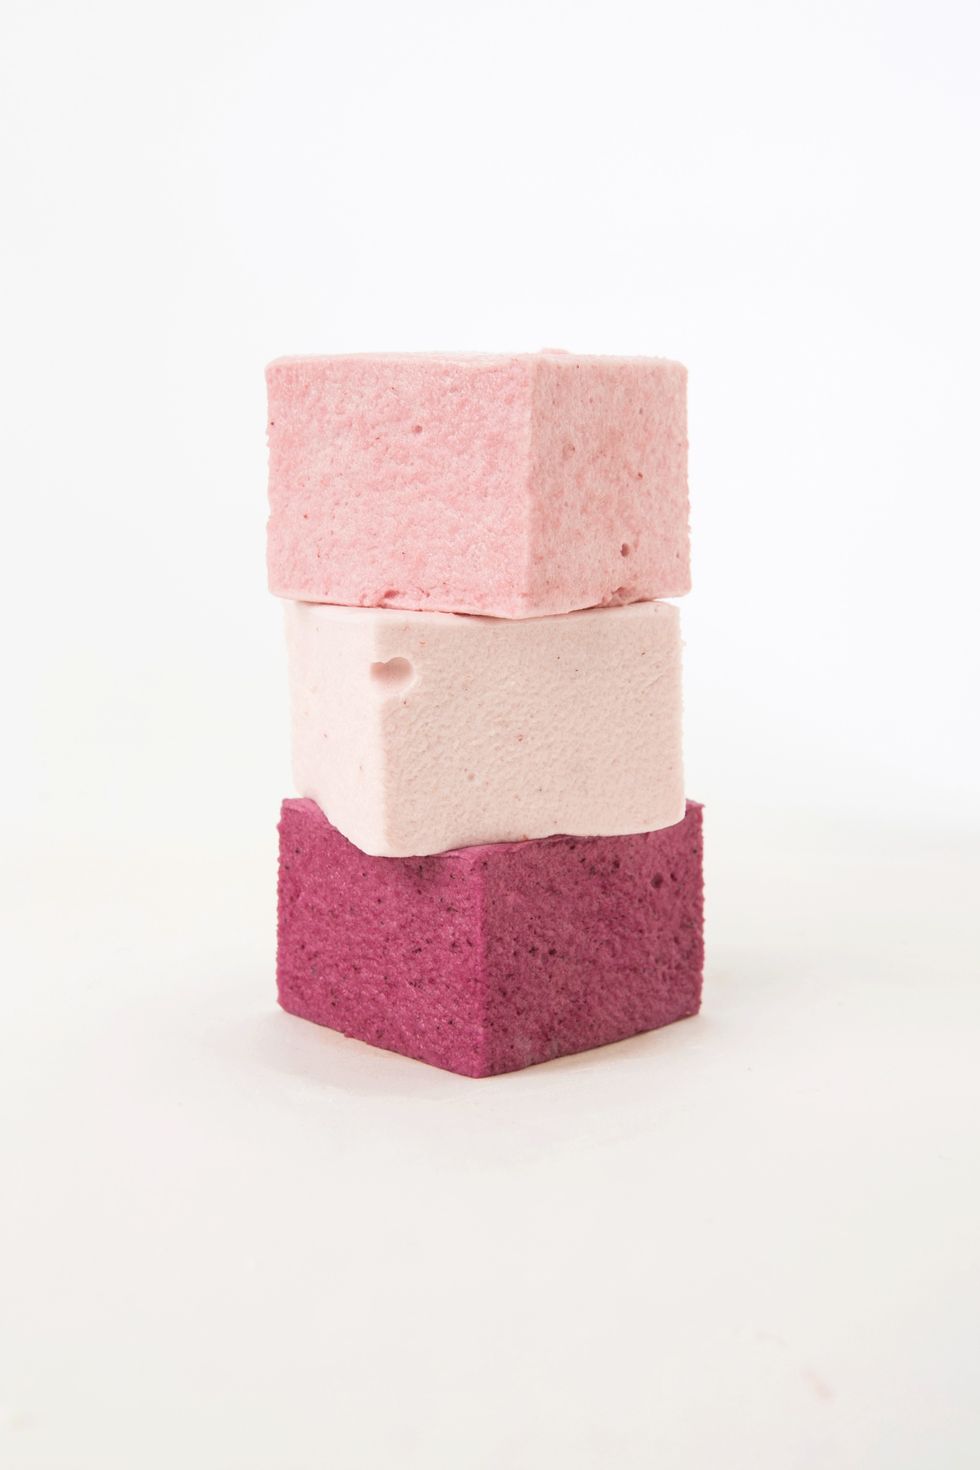 The Marshmallowists